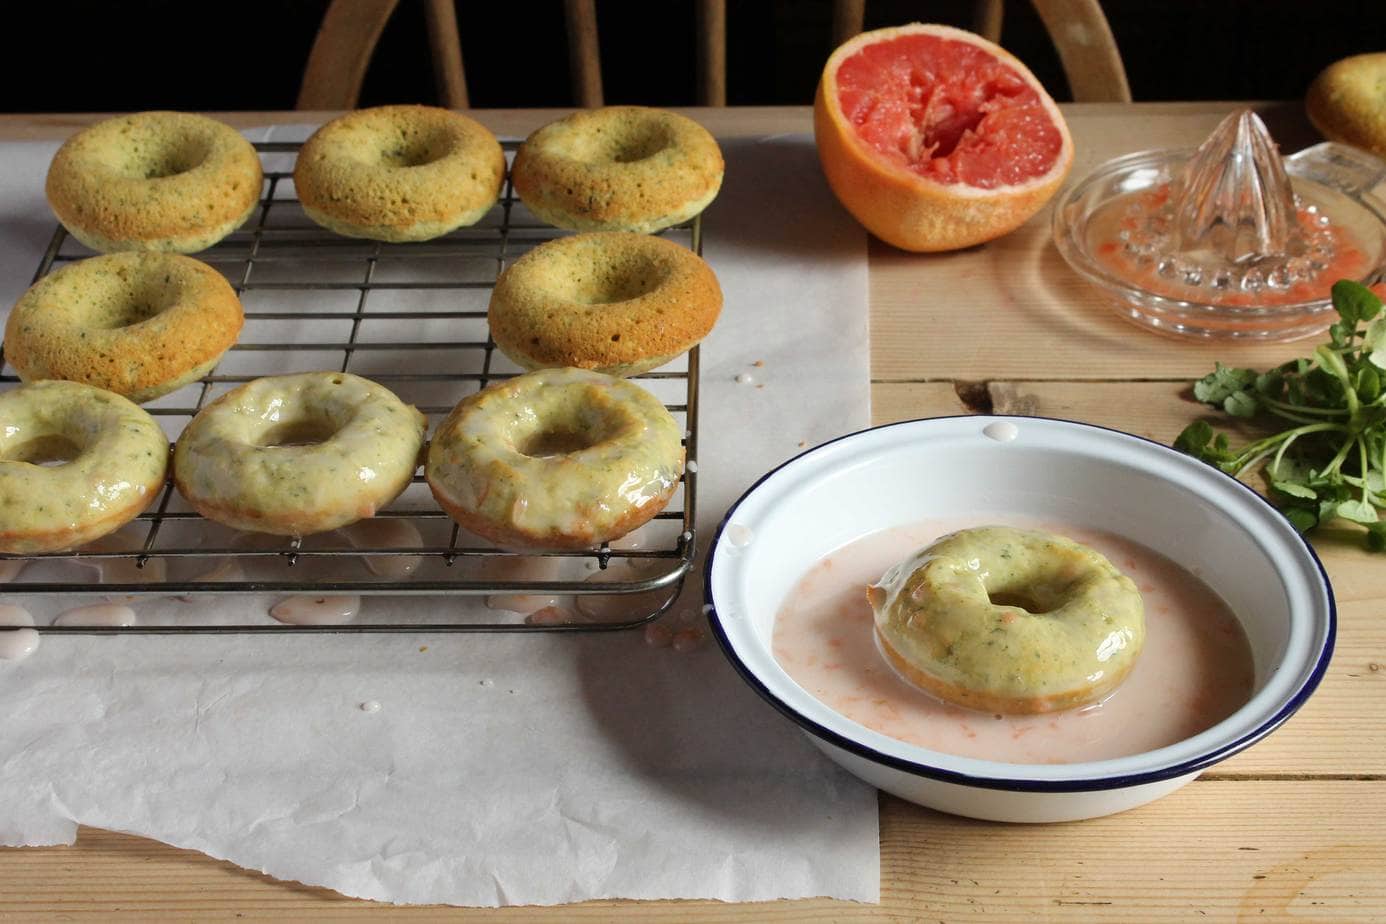 Donuts being dipped into citrus glaze.